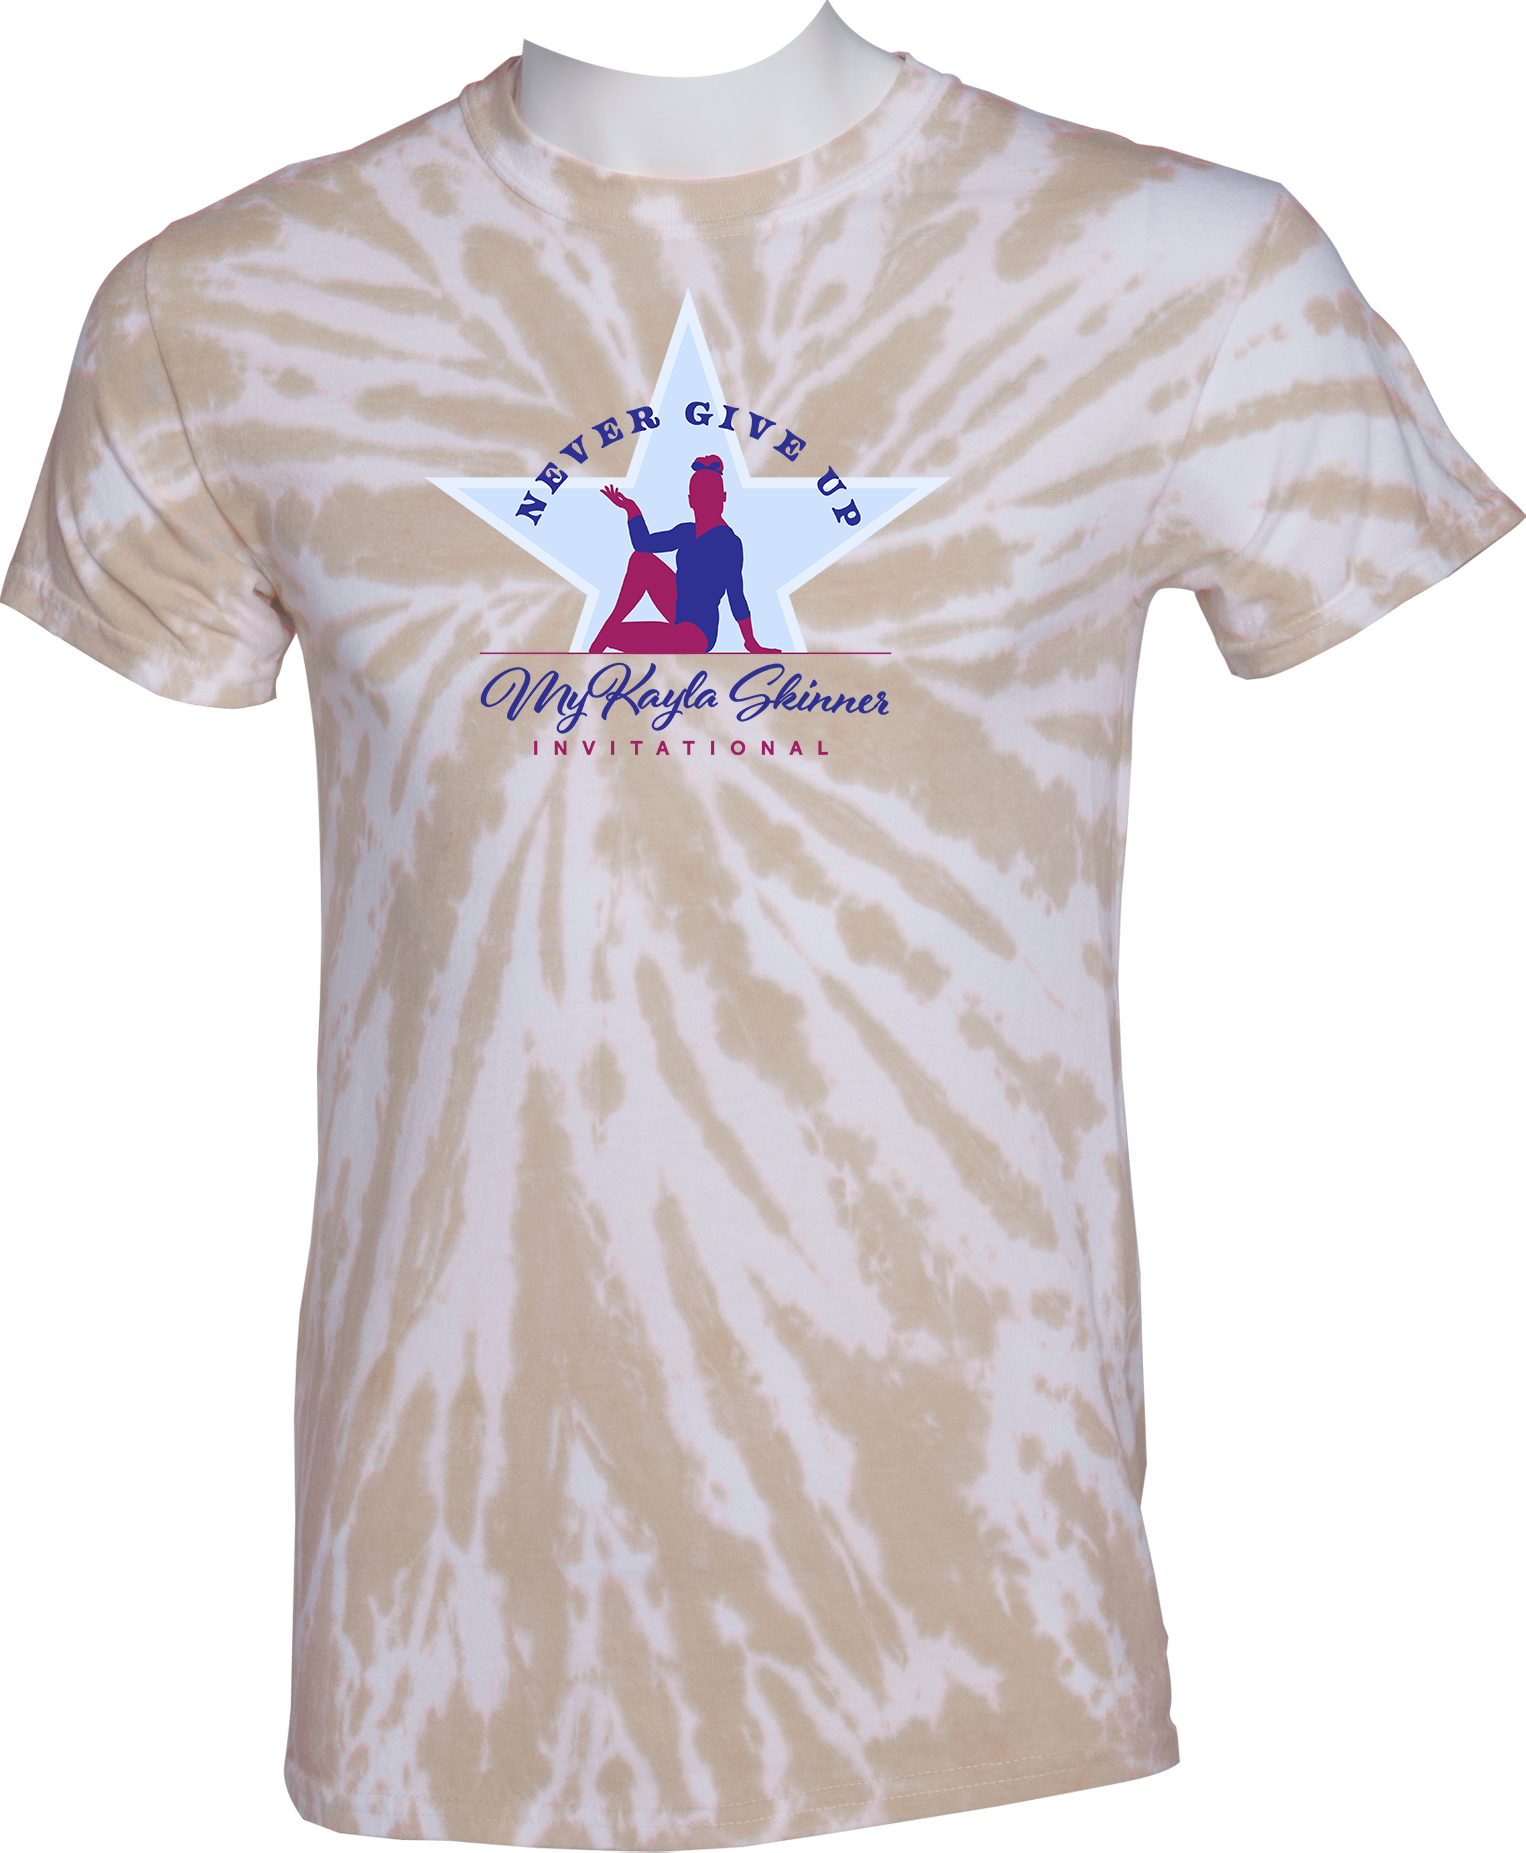 Tie-Dye Short Sleeves - 2024 Never Give Up with MyKayla Skinner